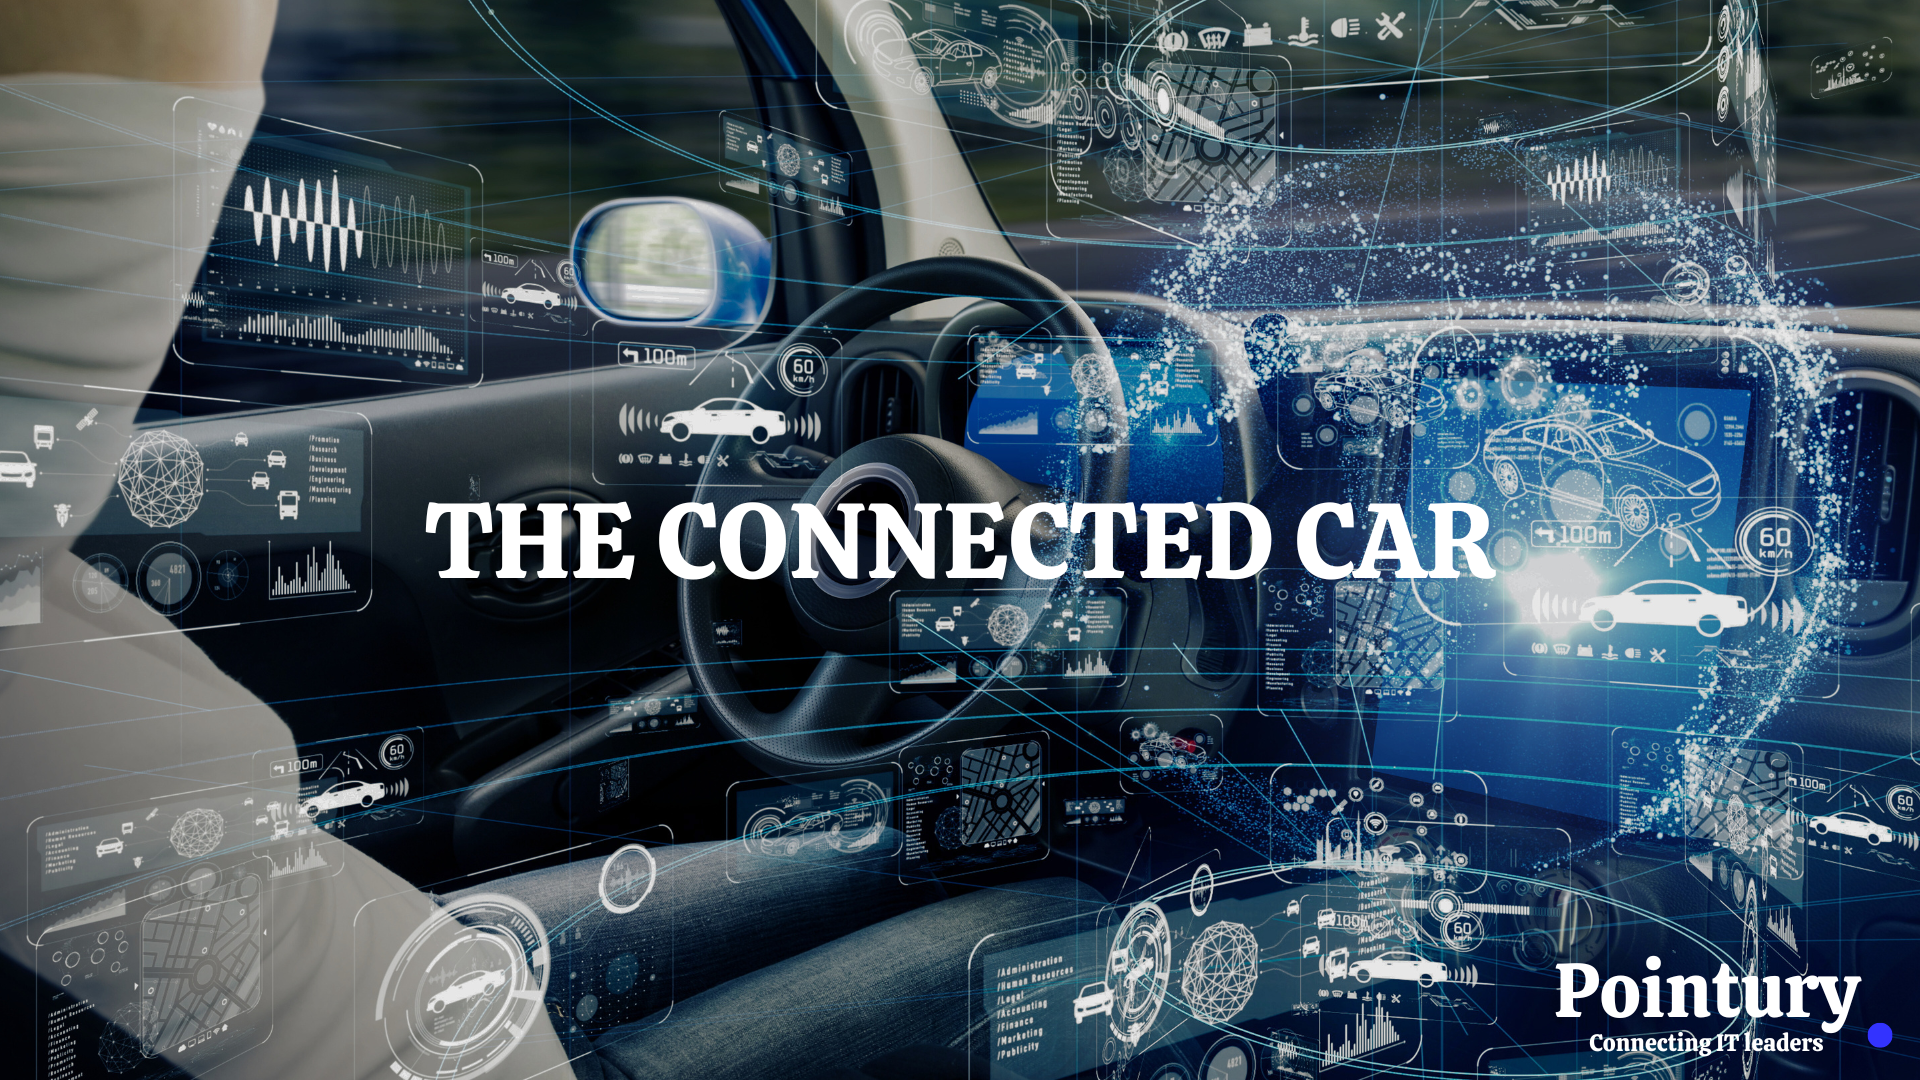 THE CONNECTED CAR